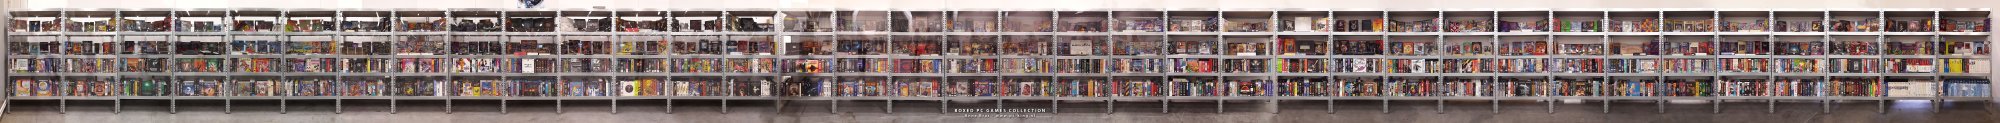 worlds-largest-boxed-pc-game-collection-anne-bras.jpg